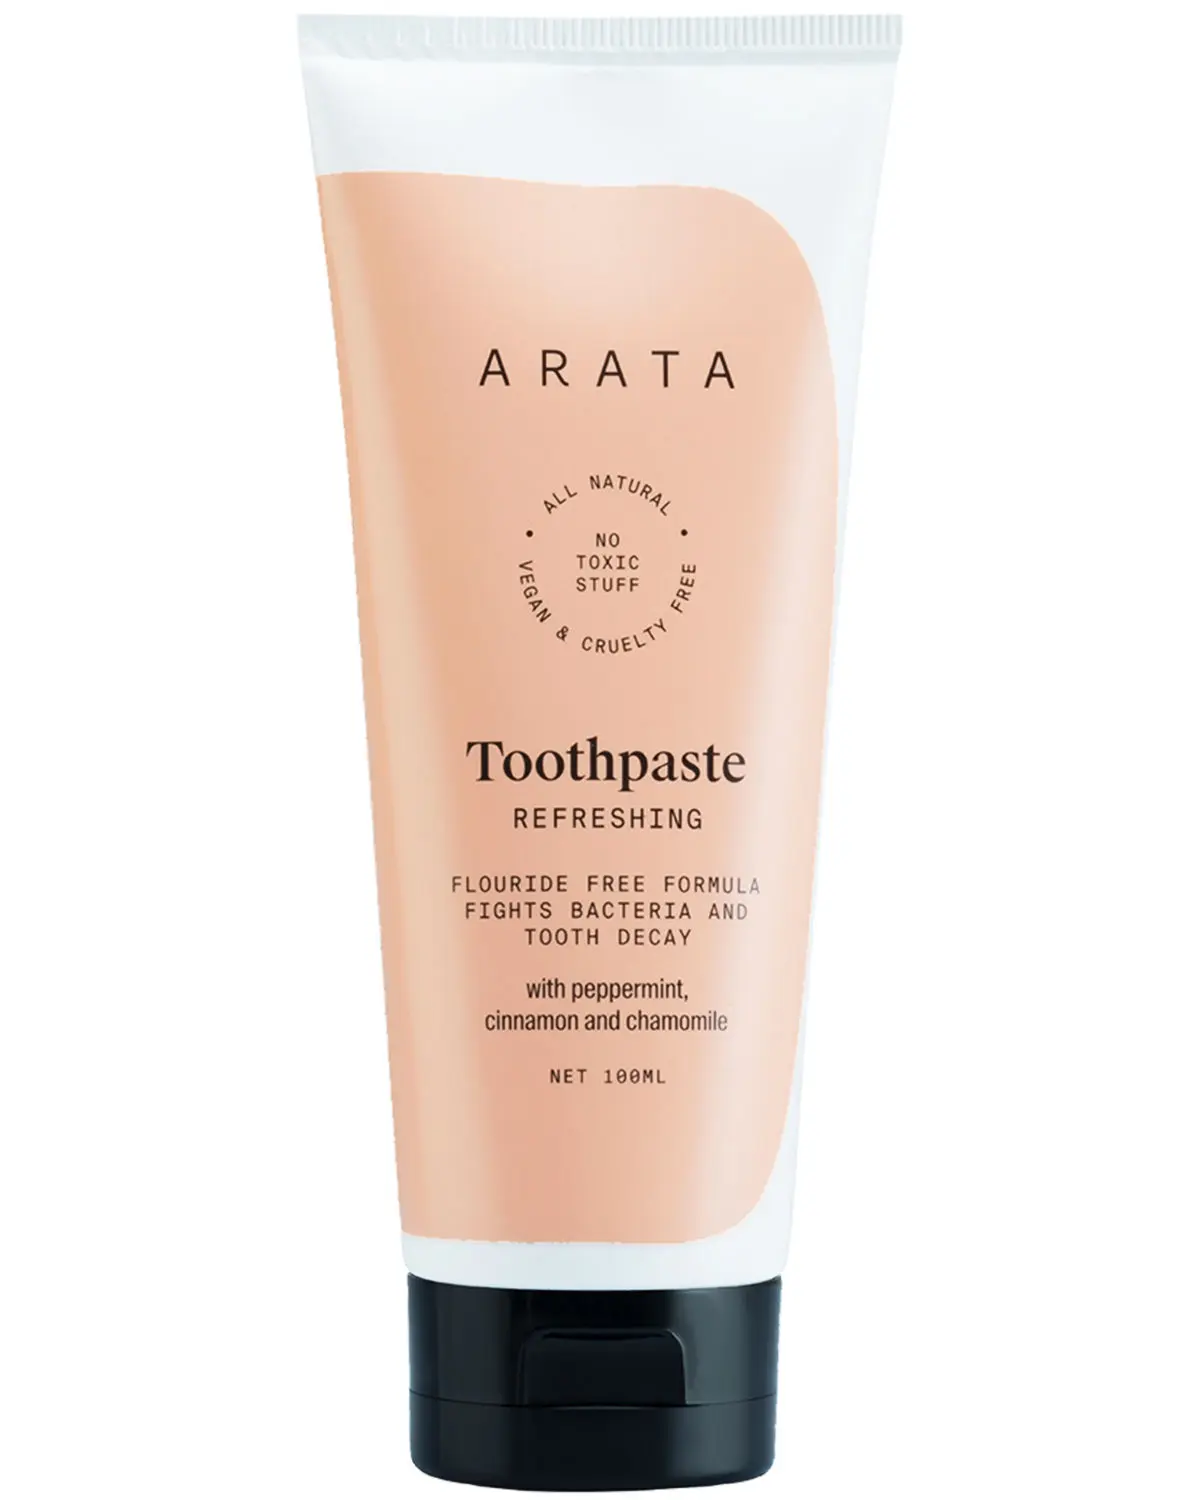 Arata Natural Refreshing Toothpaste with Peppermint ,Cinnamon & Chamomile || All Natural ,Vegan & Cruelty Free || Flouride Free Formula Fights Bacteria & Tooth Decay -100 ml